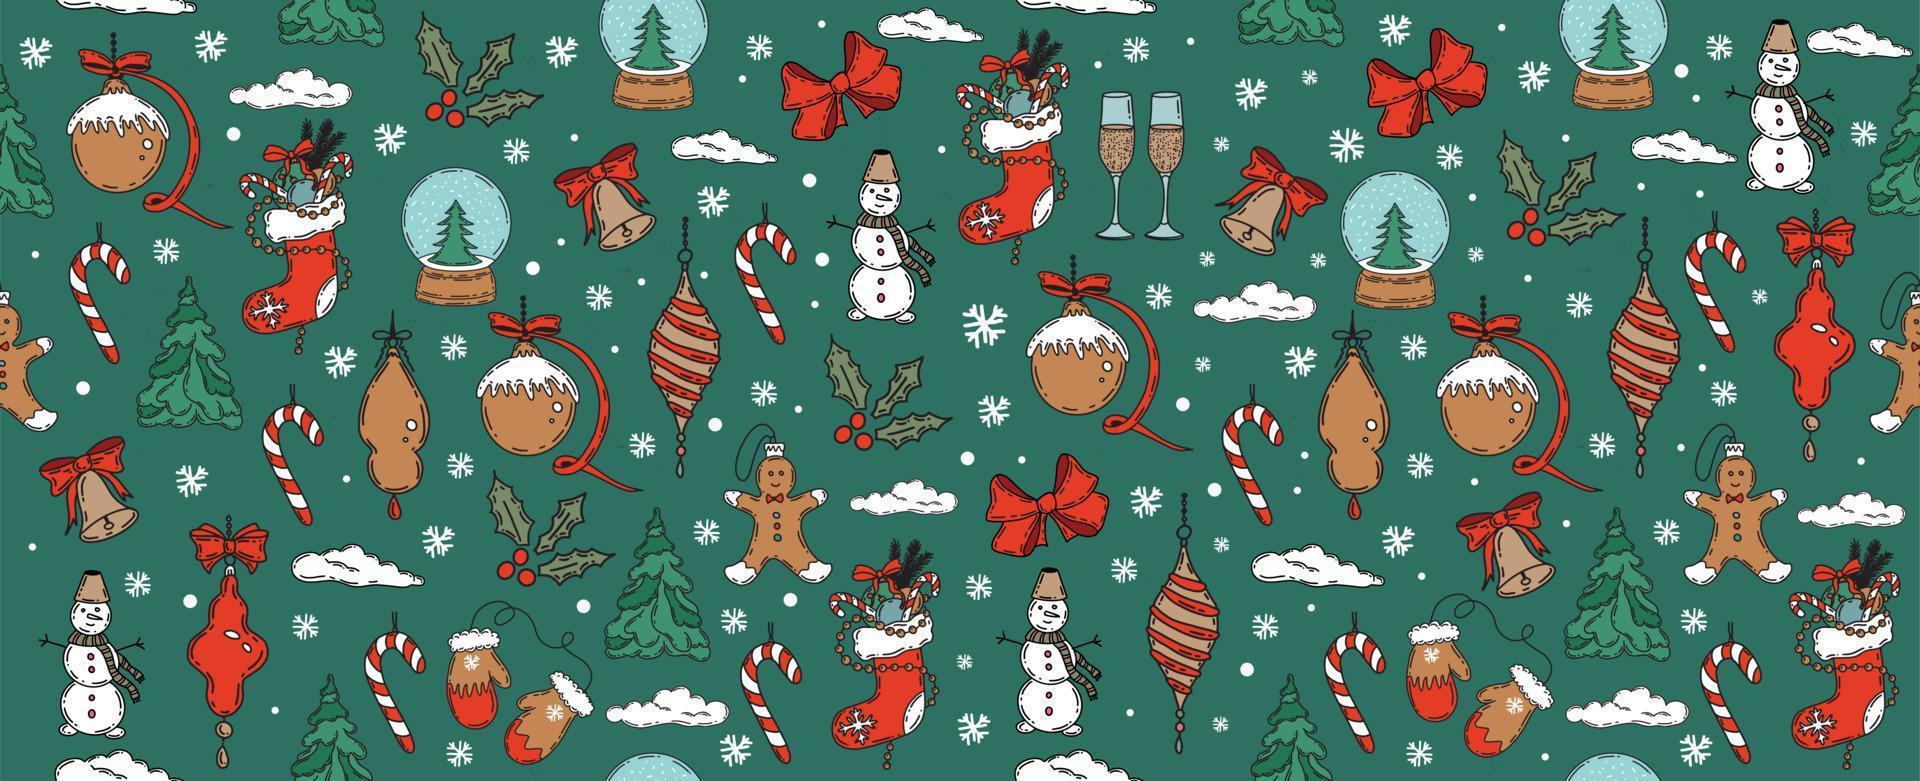 Christmas pattern in sketch style. Hand drawn illustration. vector